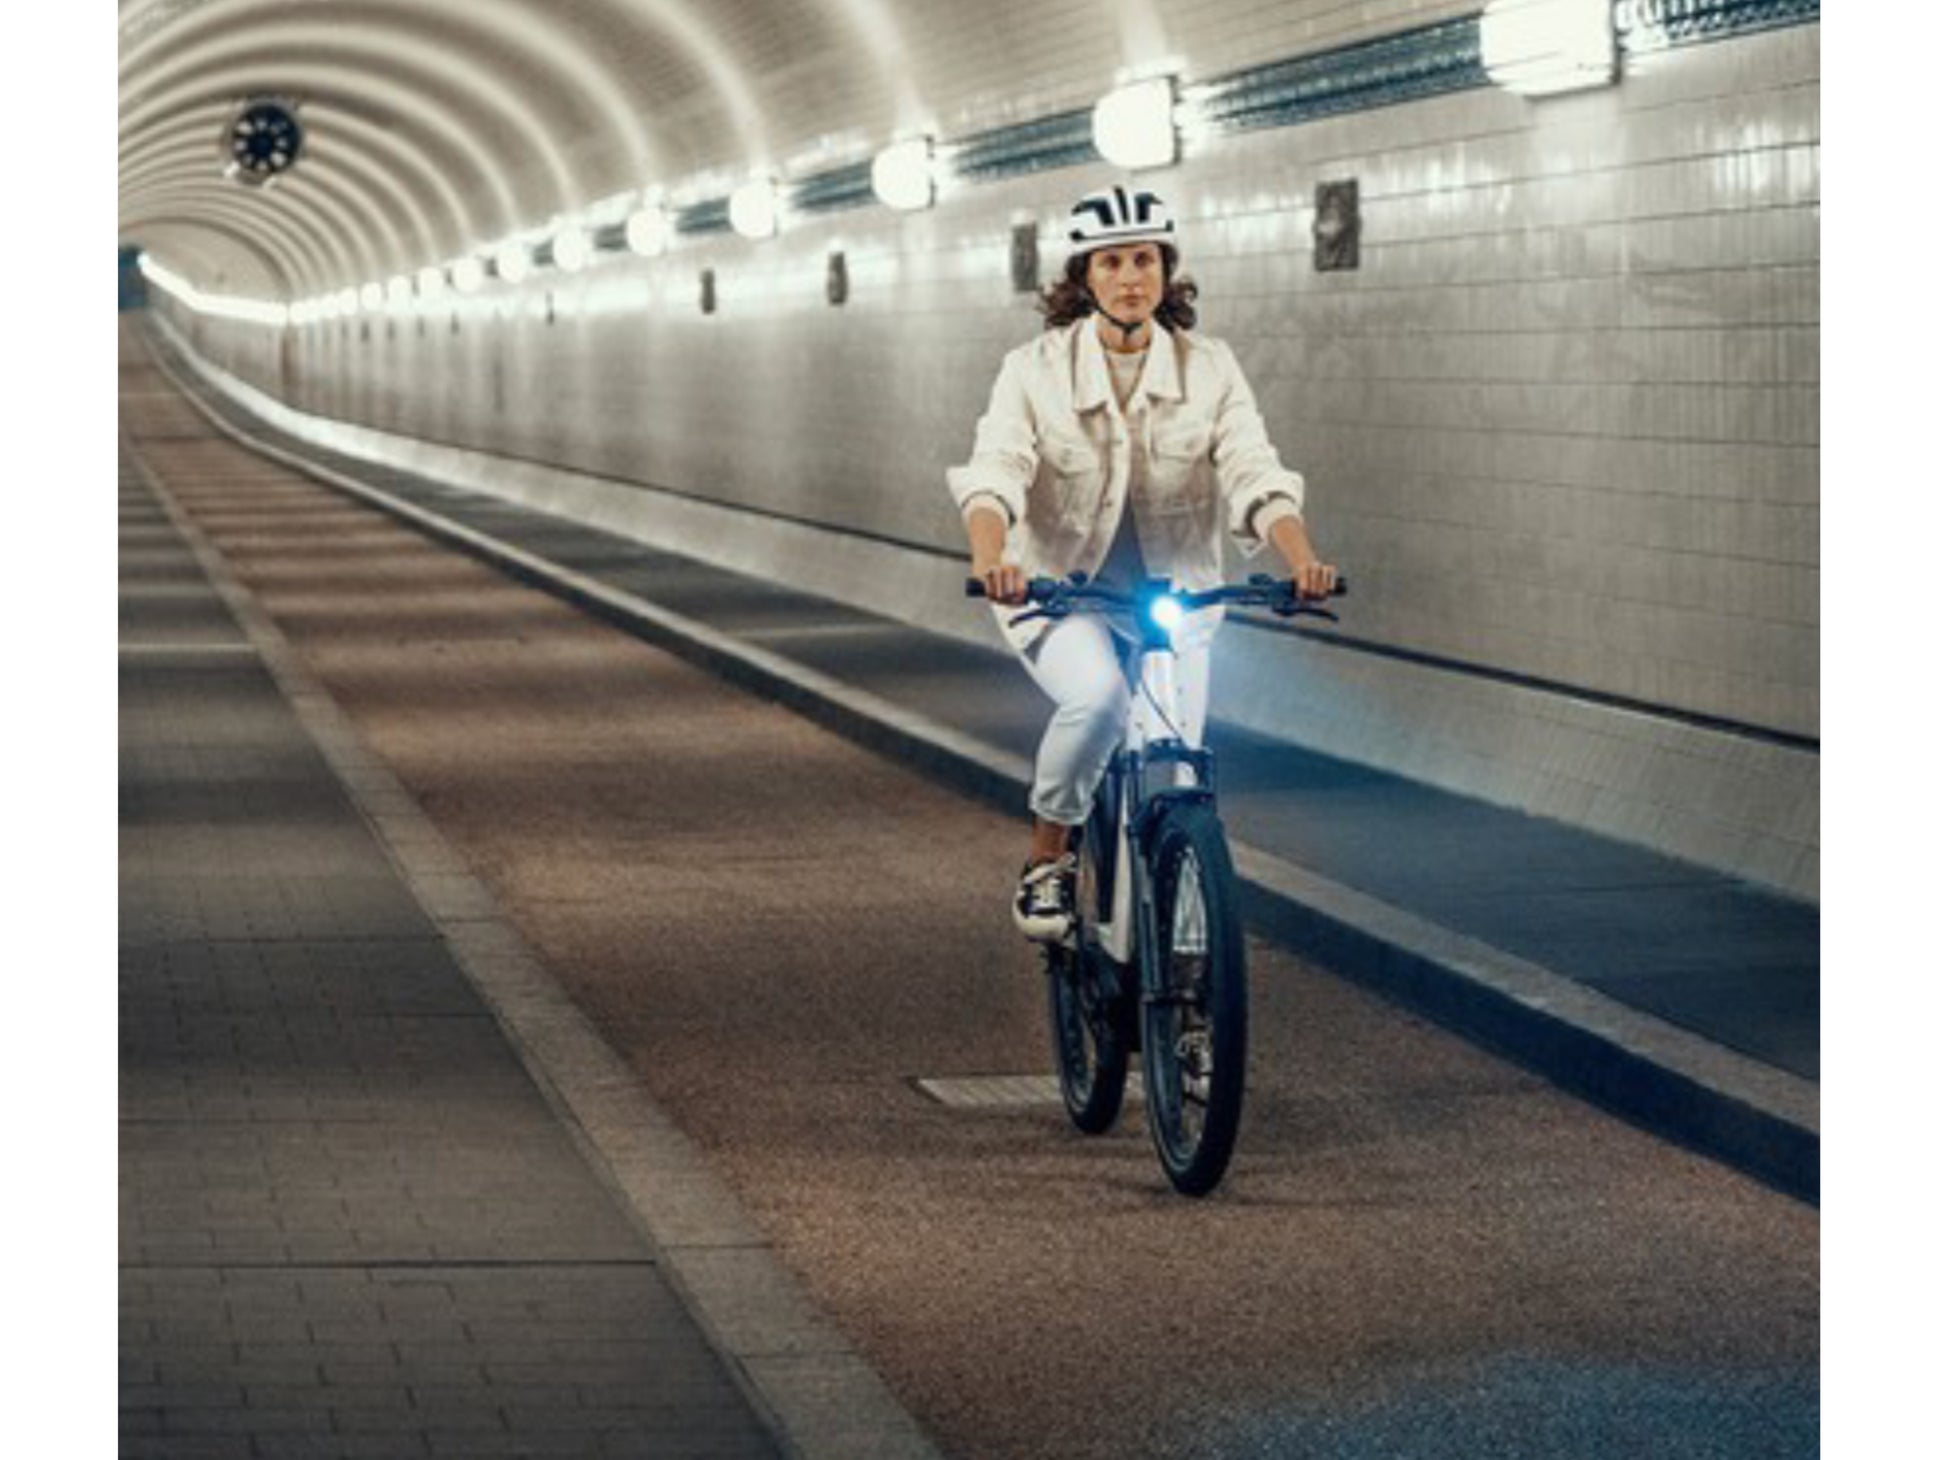 Riese and Muller Nevo GT Vario HS emtb hardtail woman riding on city tunnel bike path headlight on